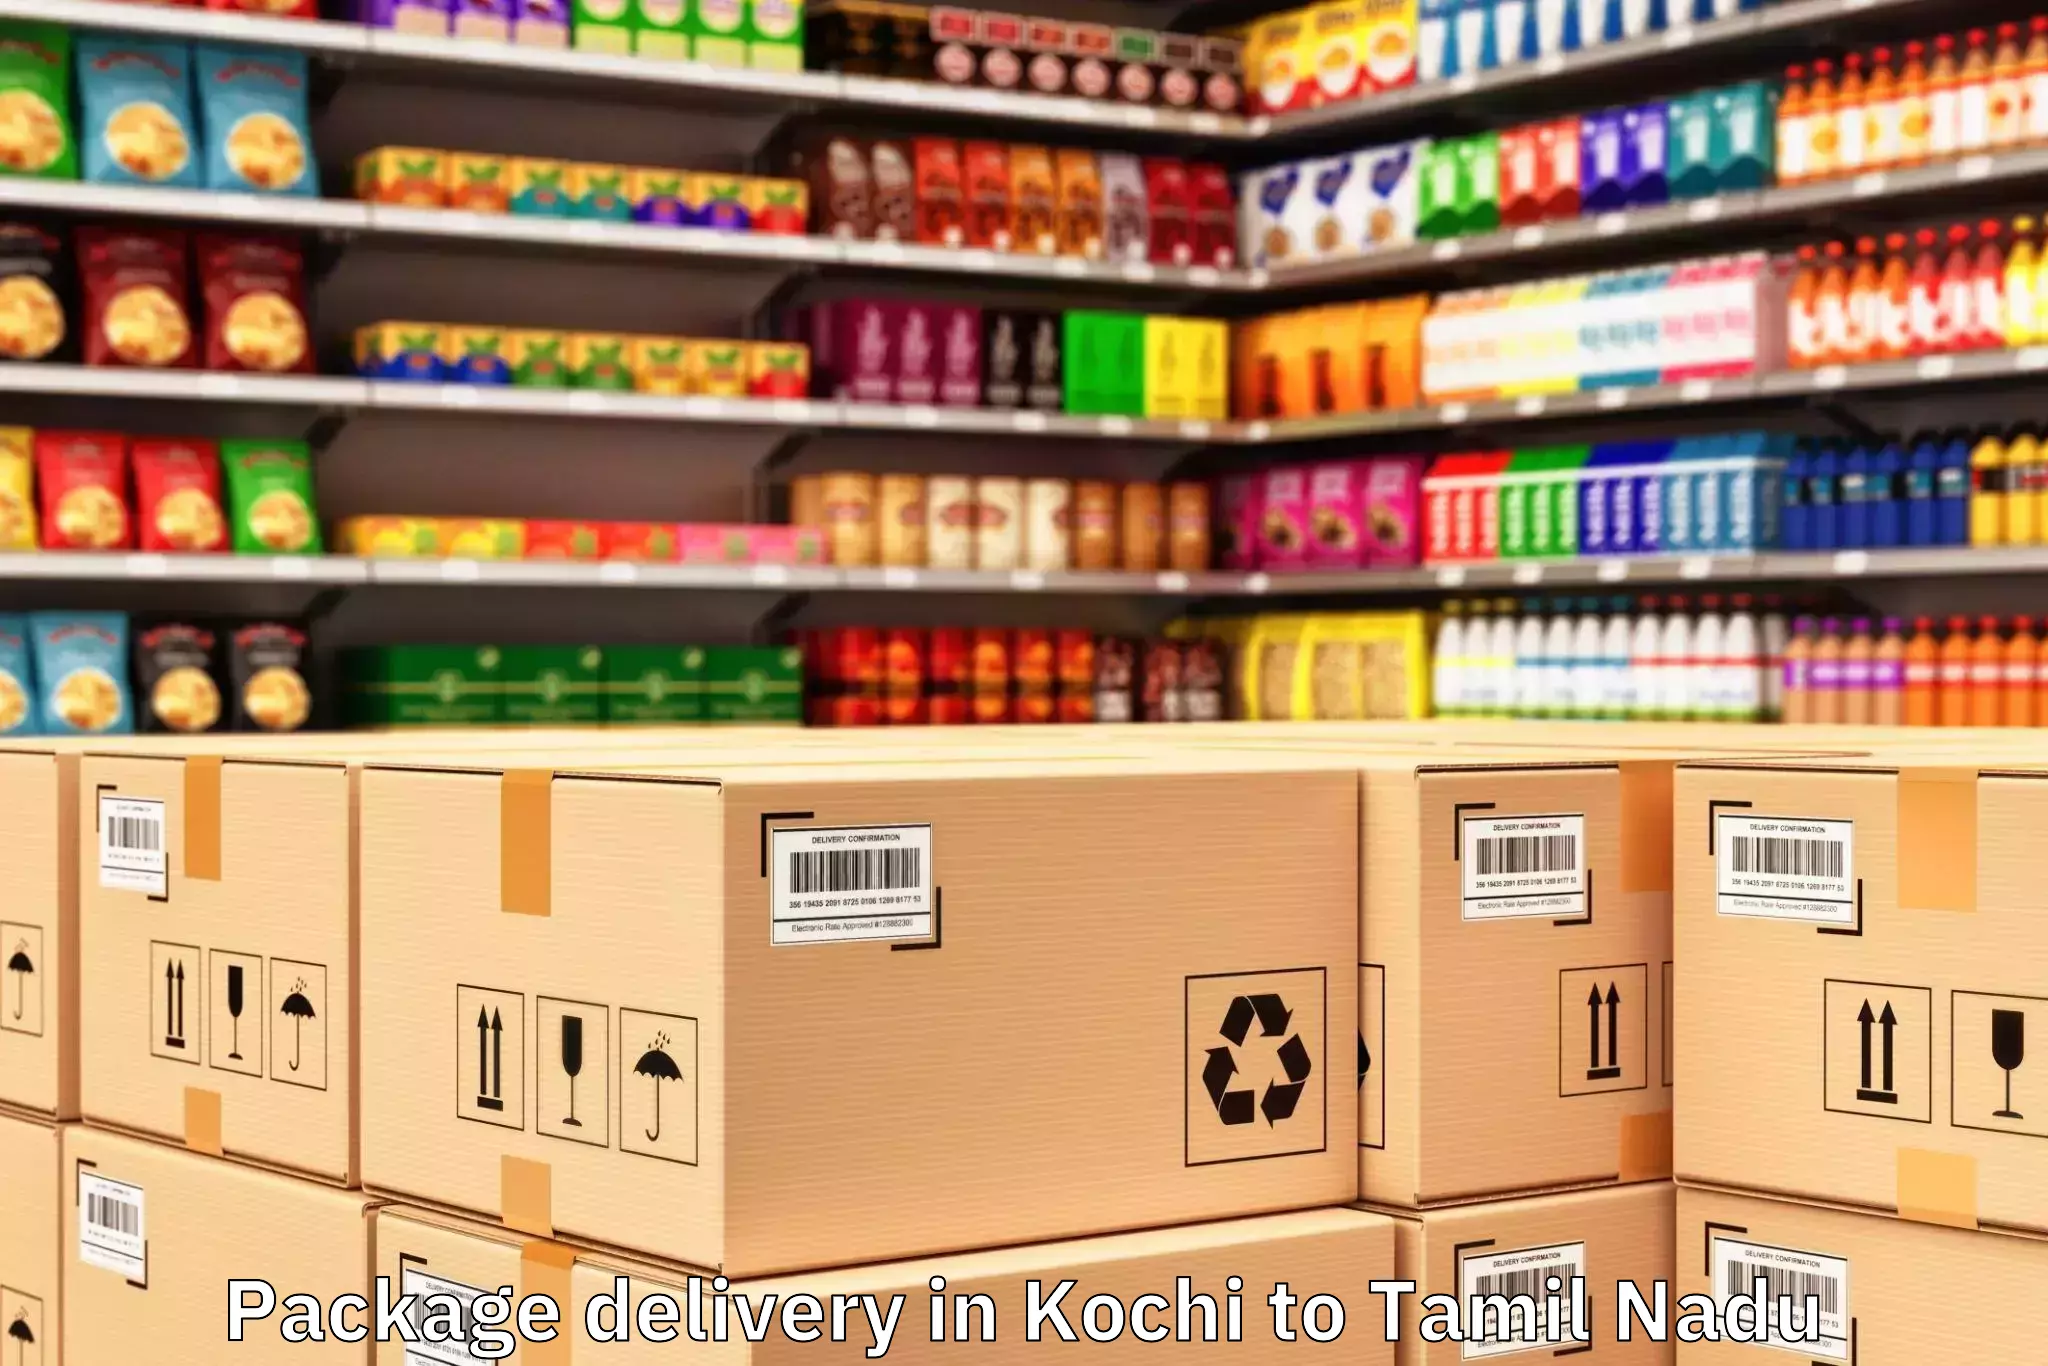 Professional Kochi to Tamil Nadu Package Delivery